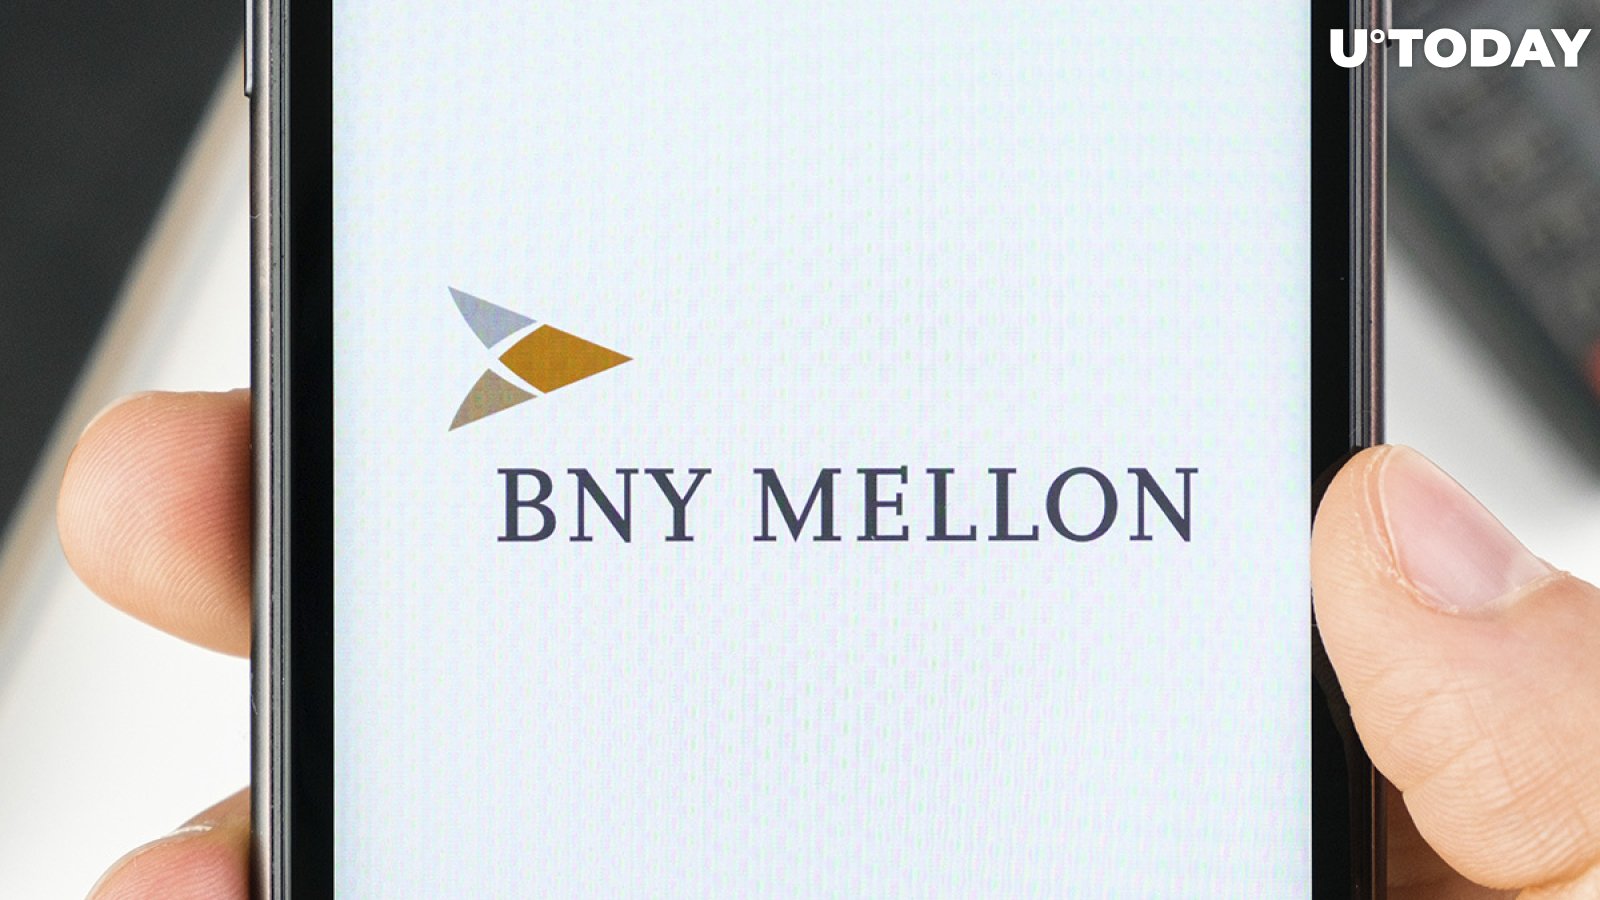 BNY Mellon Joins World's Largest Custody Banks in Cryptocurrency Trading Support